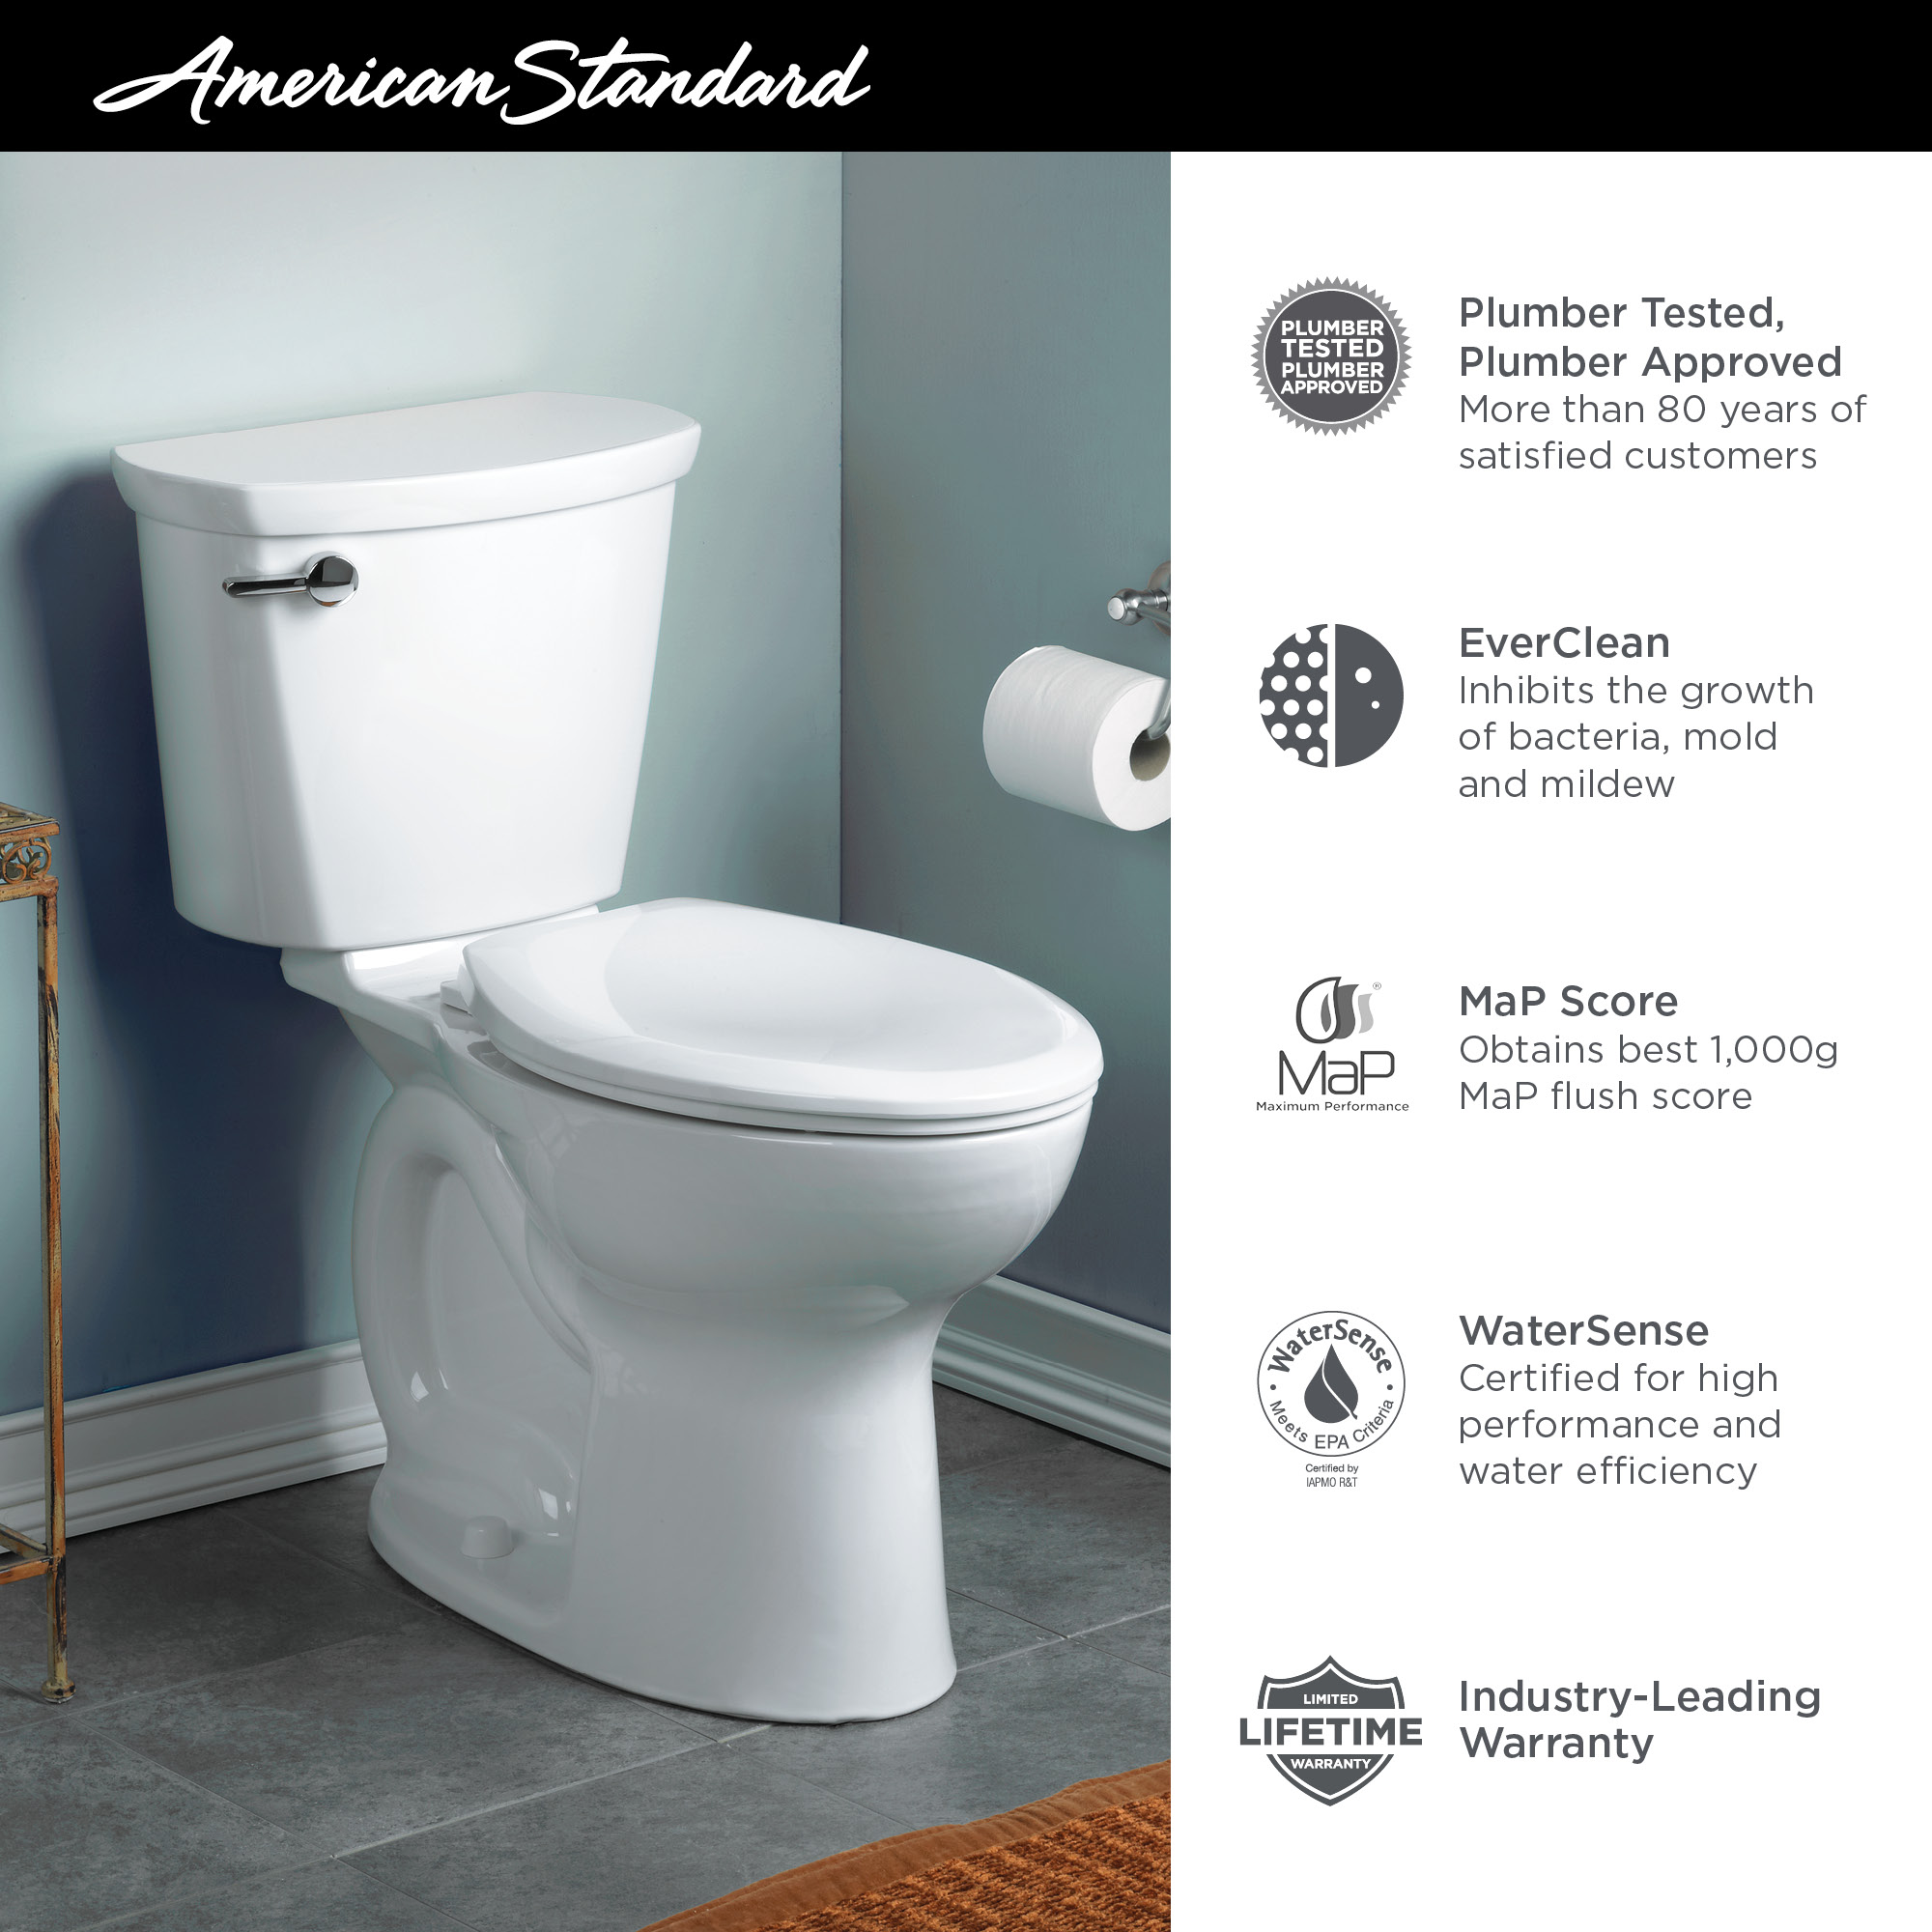 Cadet™ PRO Two-Piece 1.28 gpf/4.8 Lpf Compact Chair Height Elongated 14-Inch Rough Toilet Less Seat